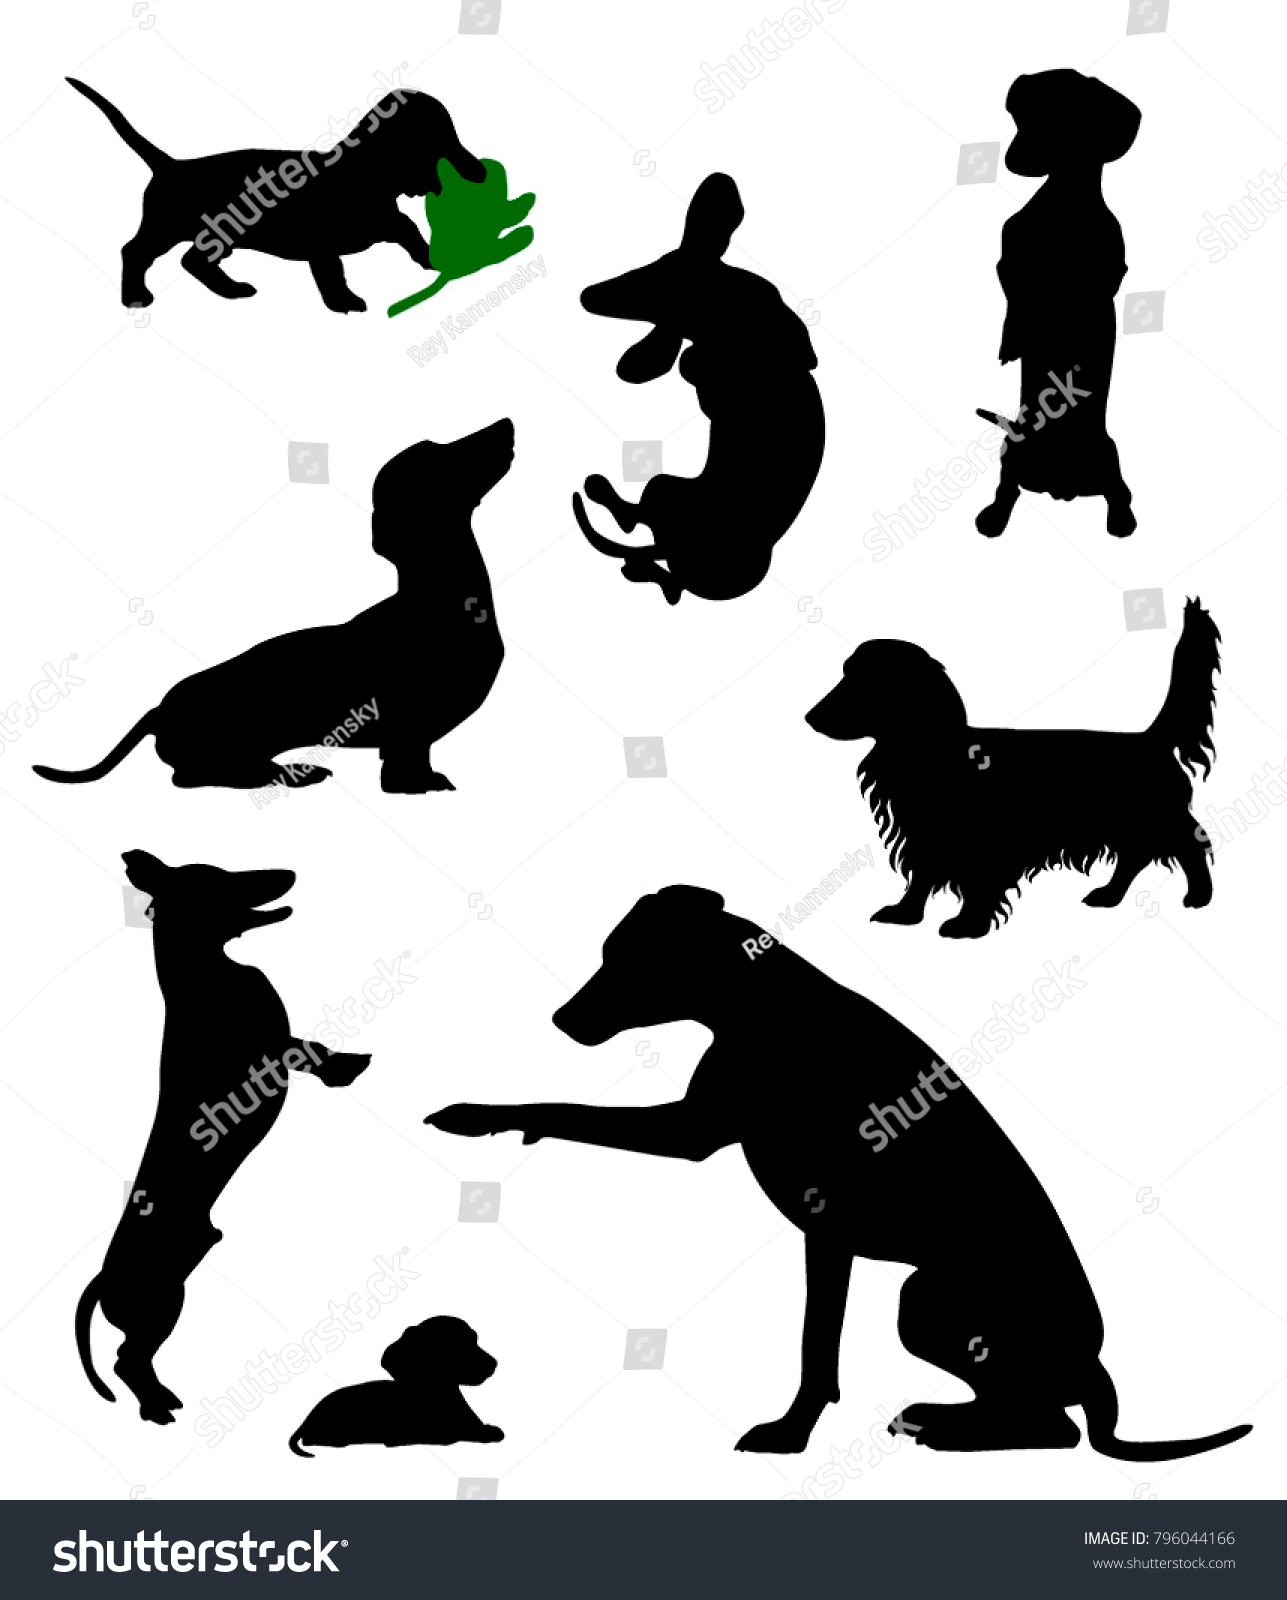 SVG of Silhouettes of dachshunds. Vector illustration. svg